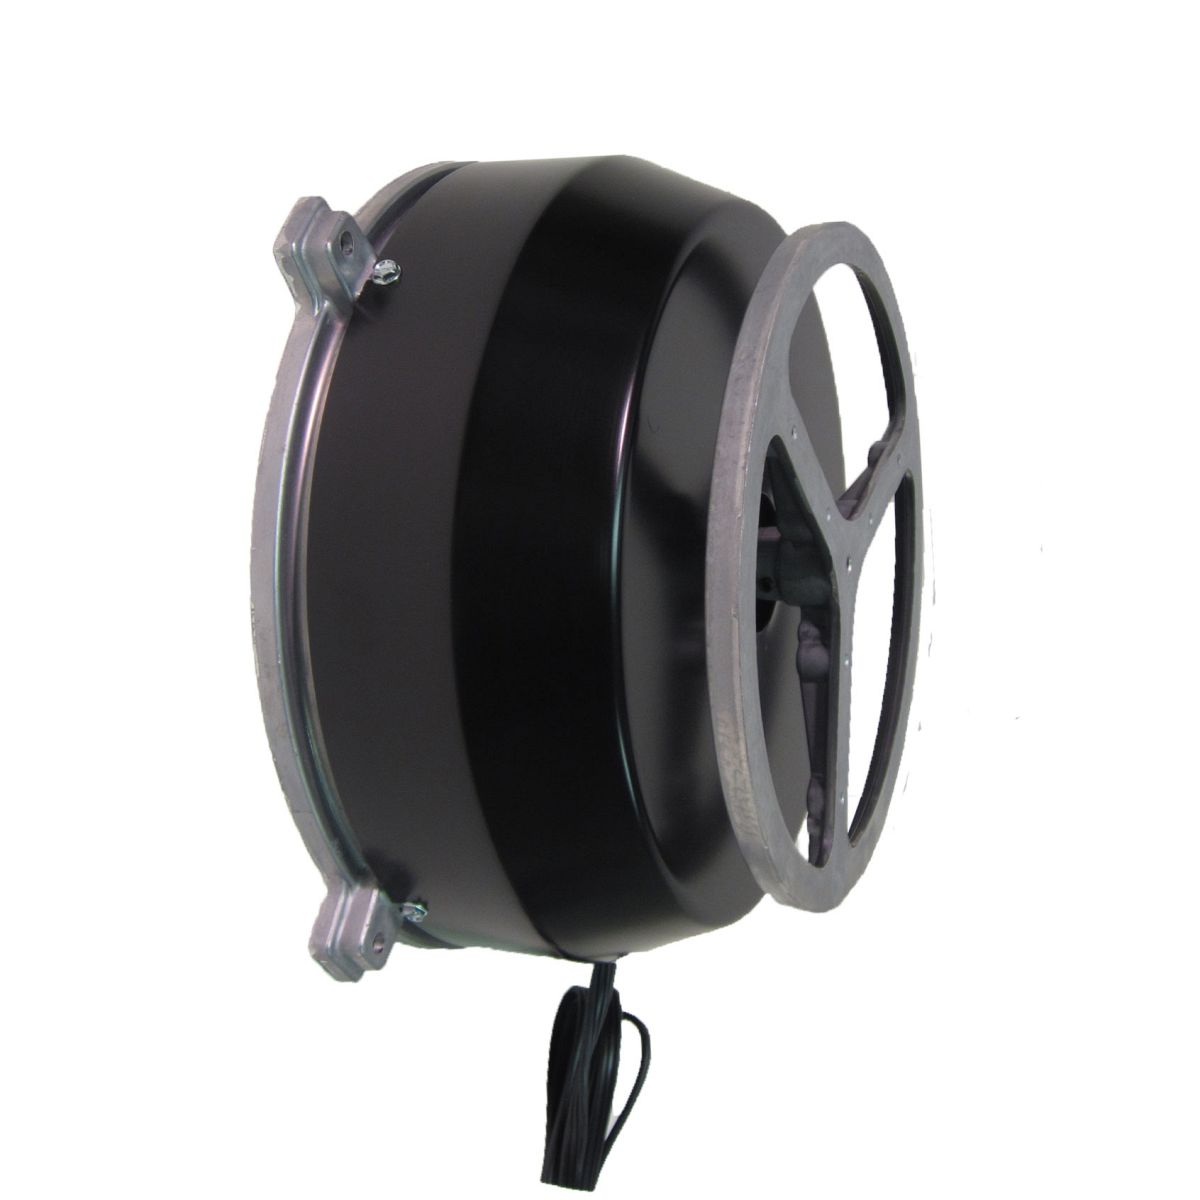 Wall Mount Turntable - 75 Pounds